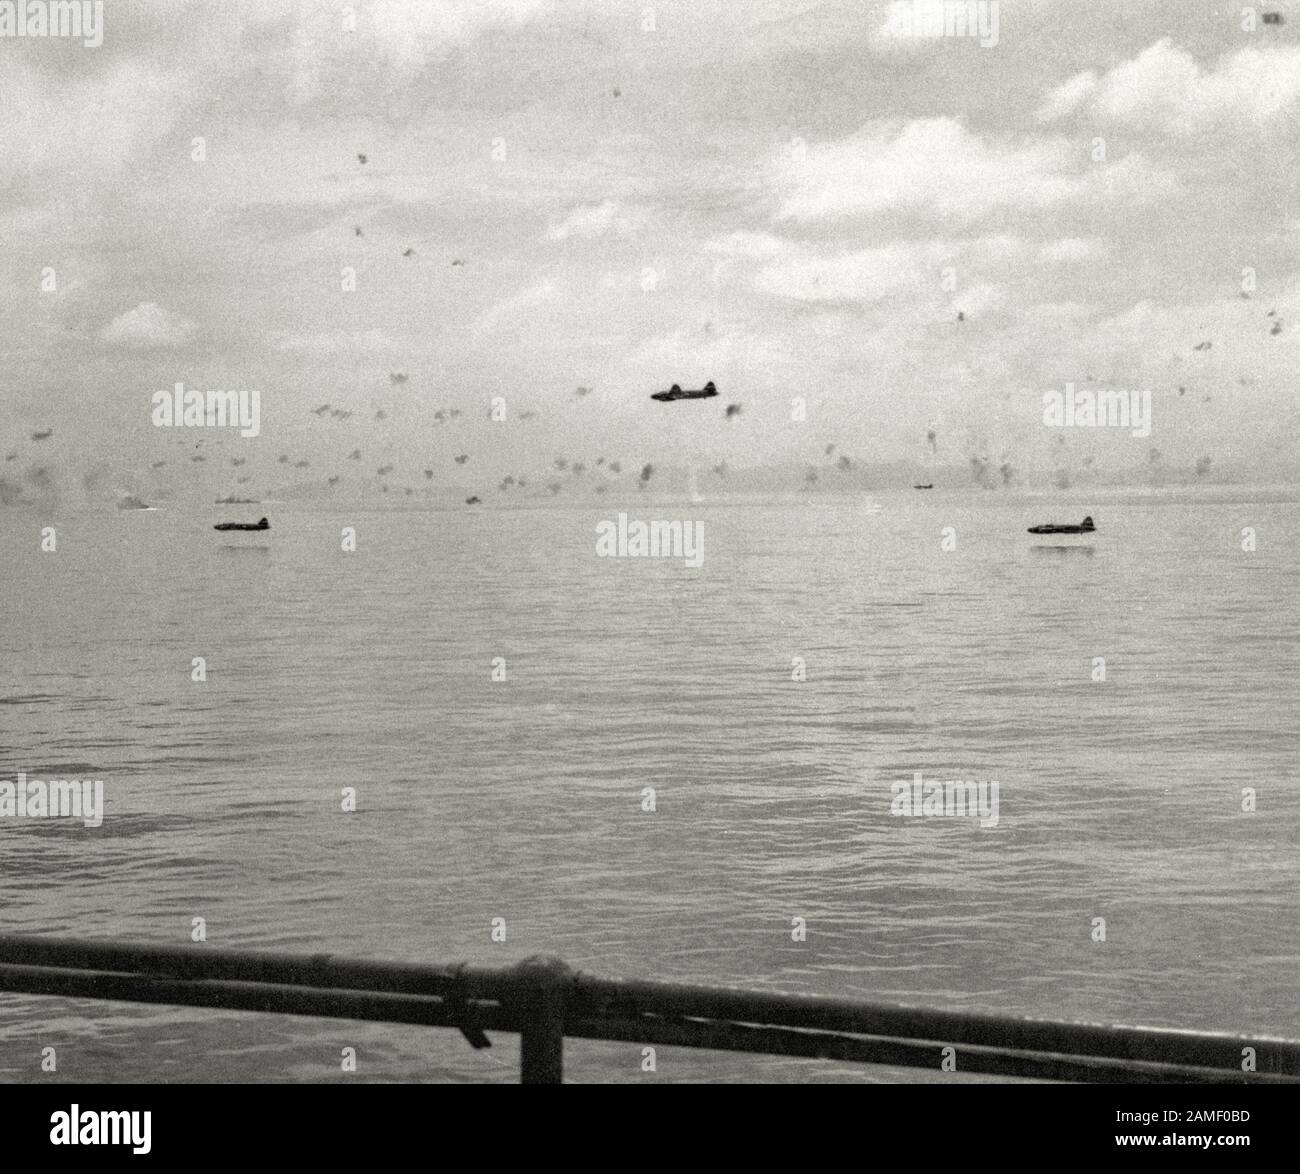 The Japanese Mitsubishi G4M torpedo bombers on a low-level flight during the second attack on the American ships from the sea convoy in Operation Watc Stock Photo